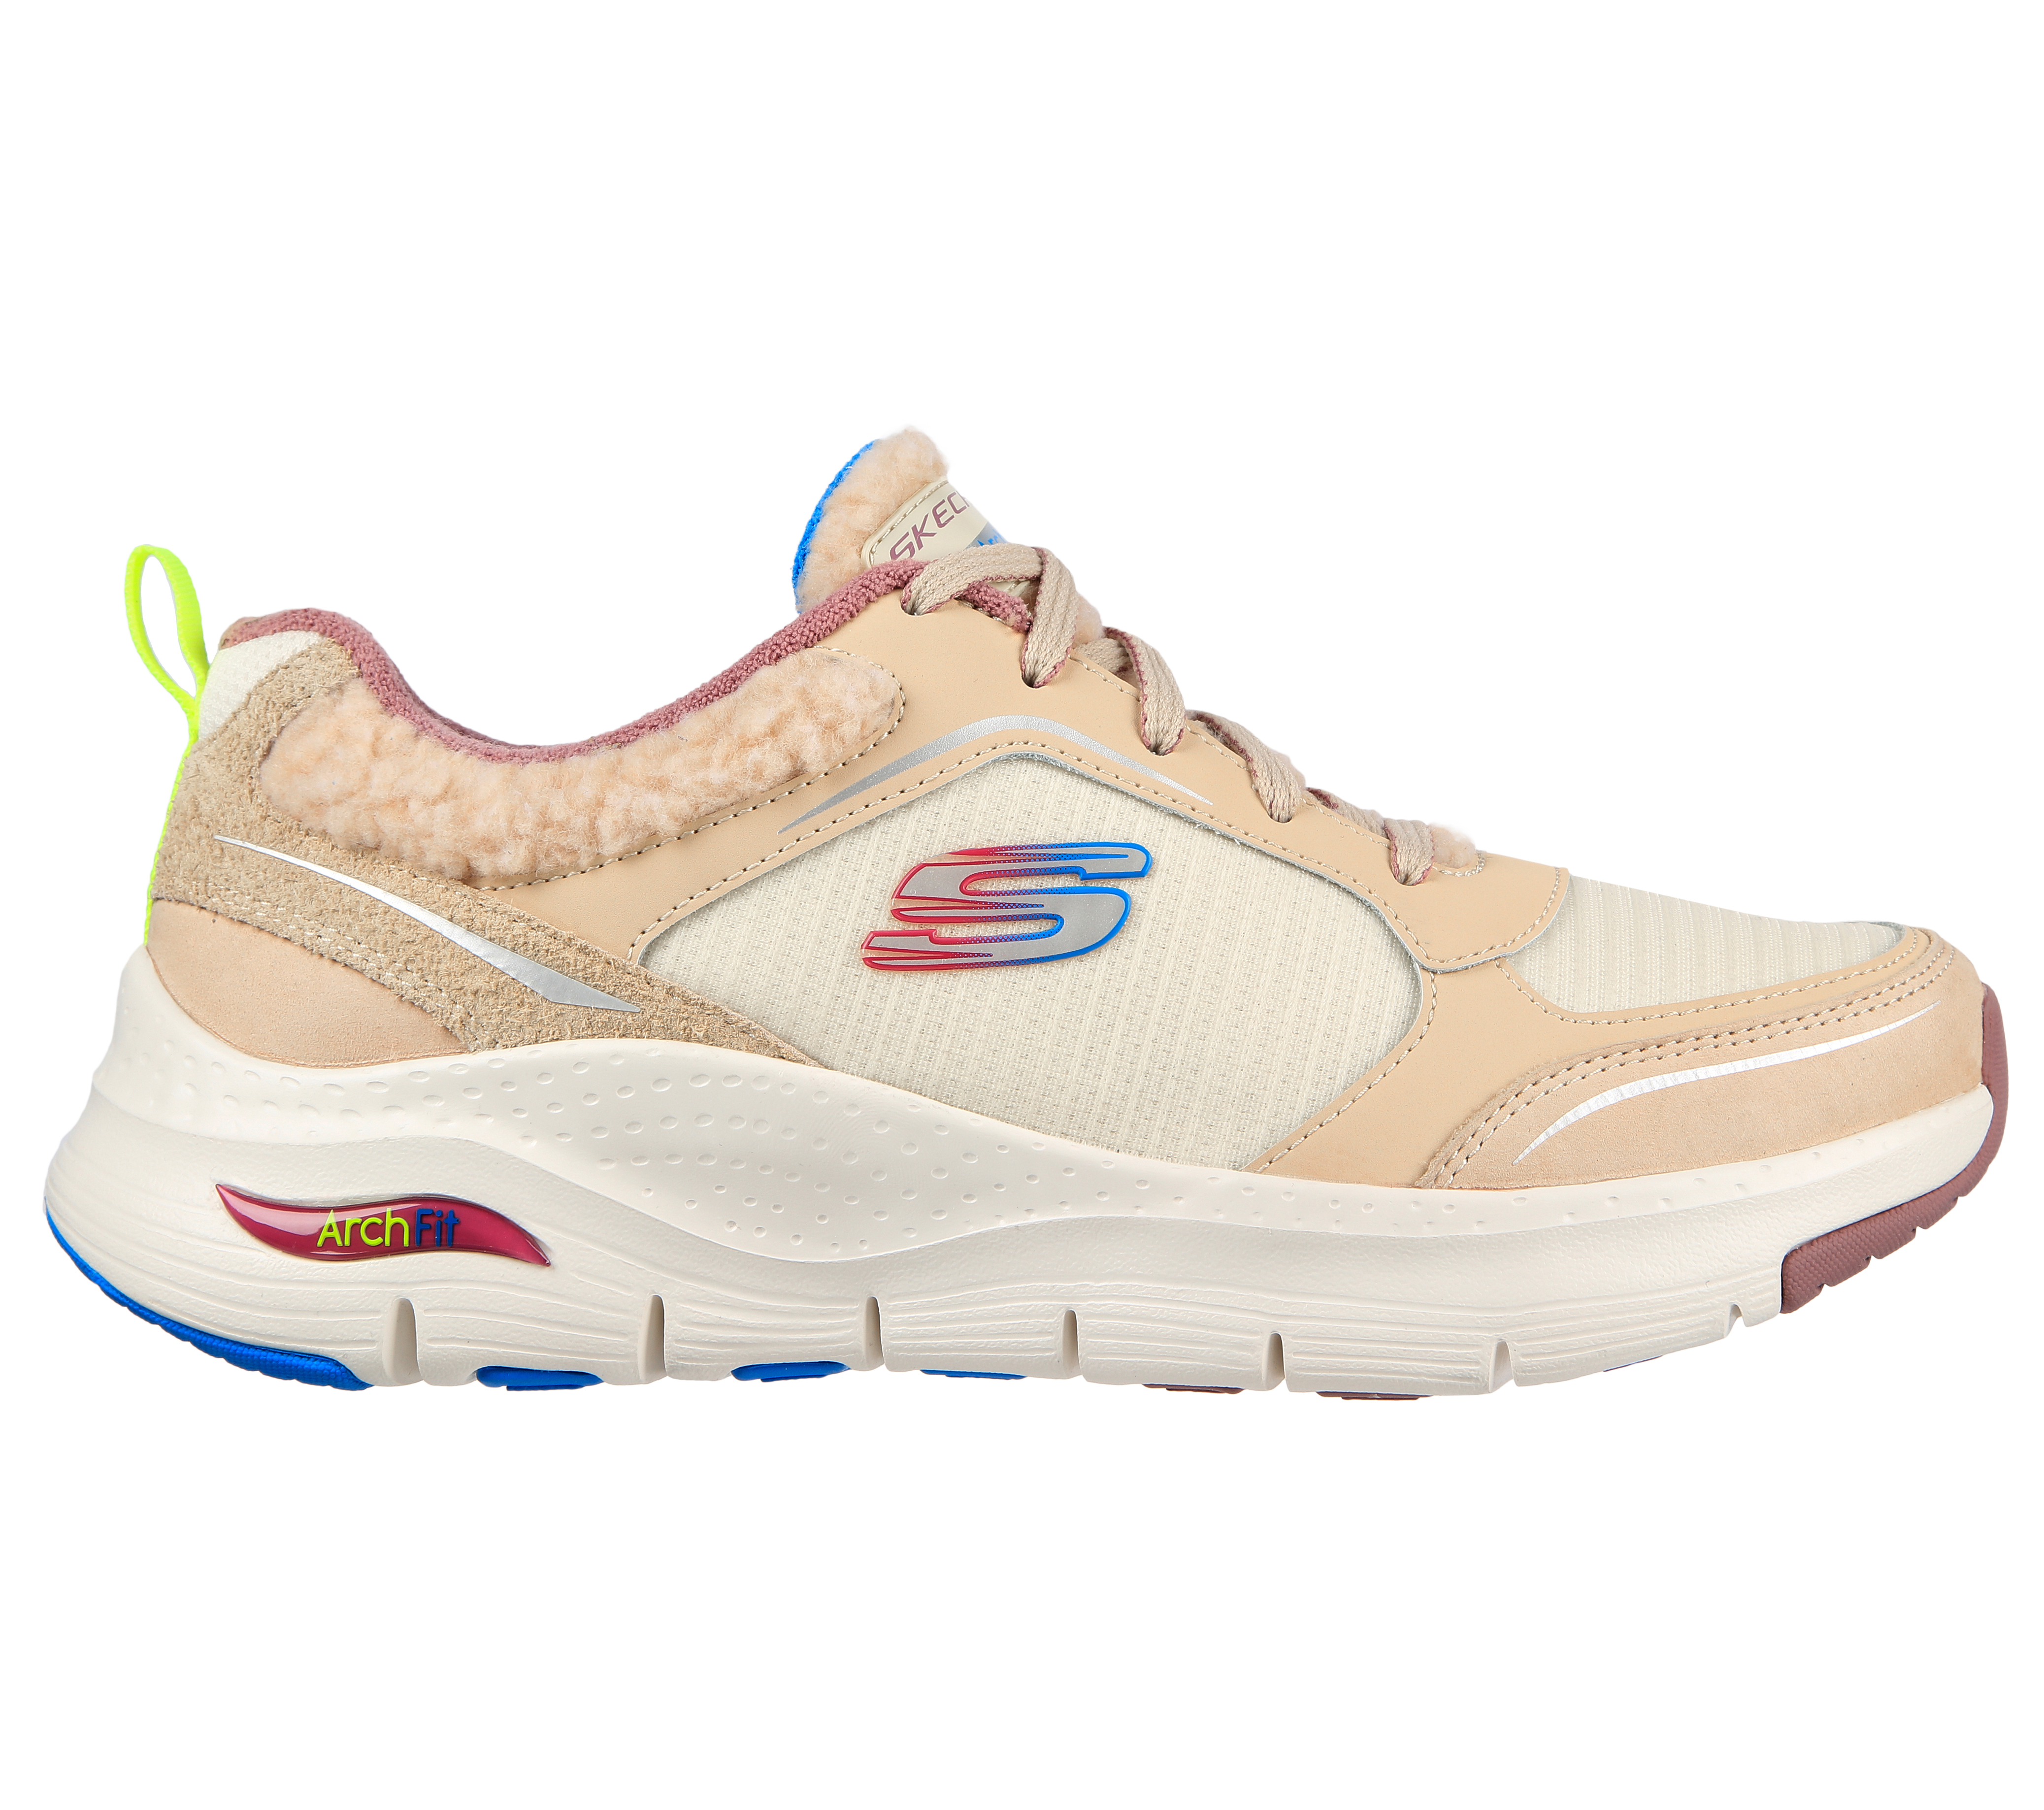 Shop the Skechers Luxe Collection 